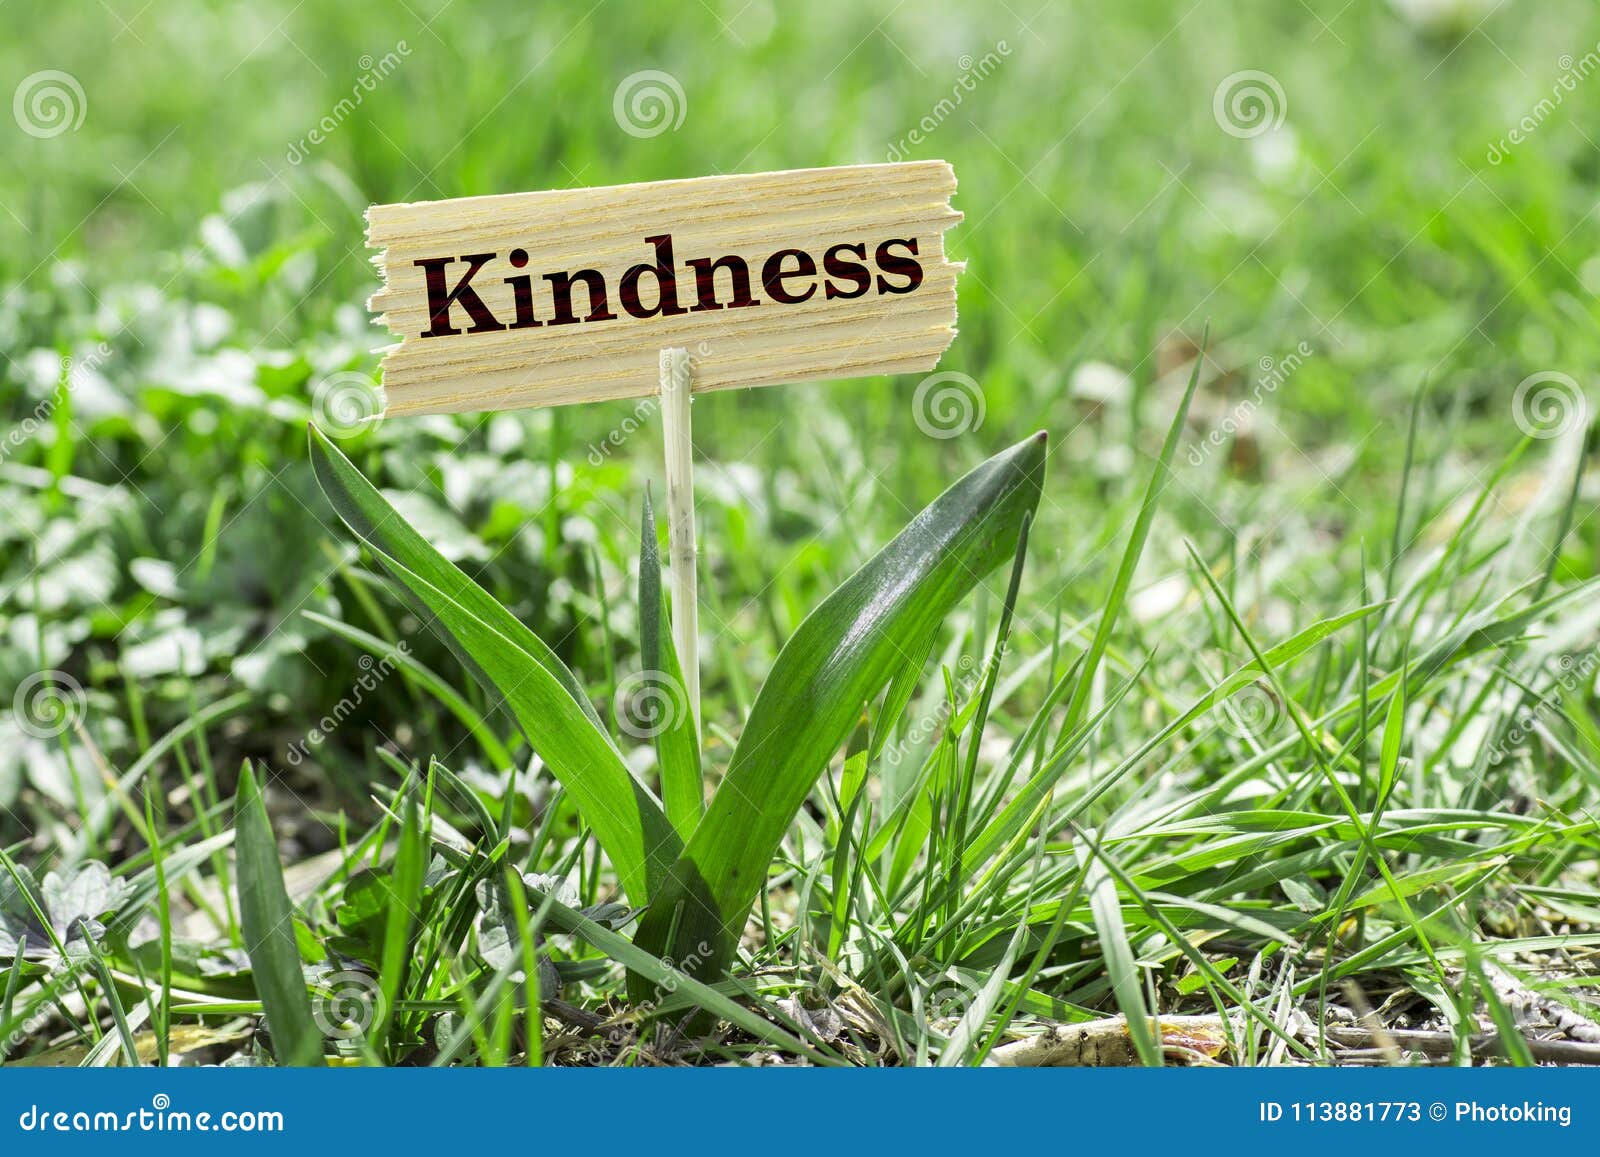 kindness wooden sign